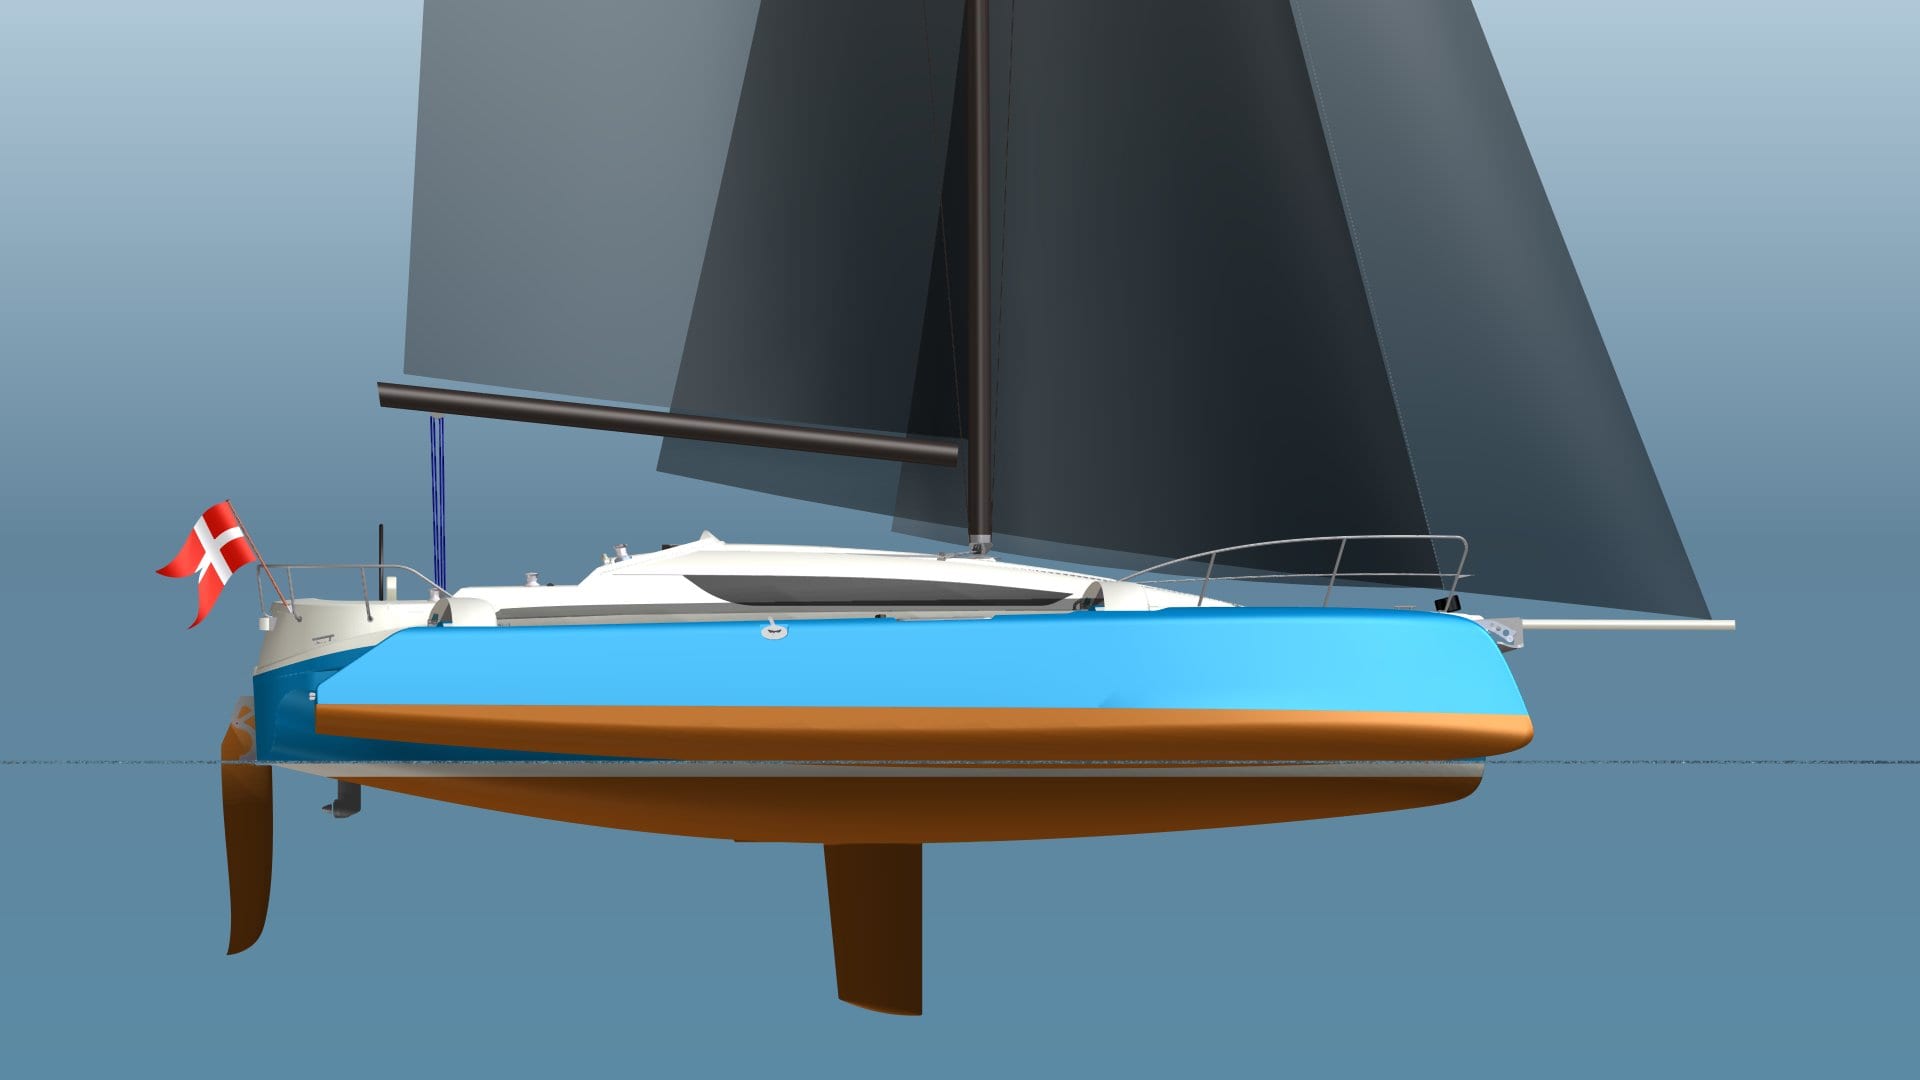 TMG Announces Two New Members of the Dragonfly Trimaran Family